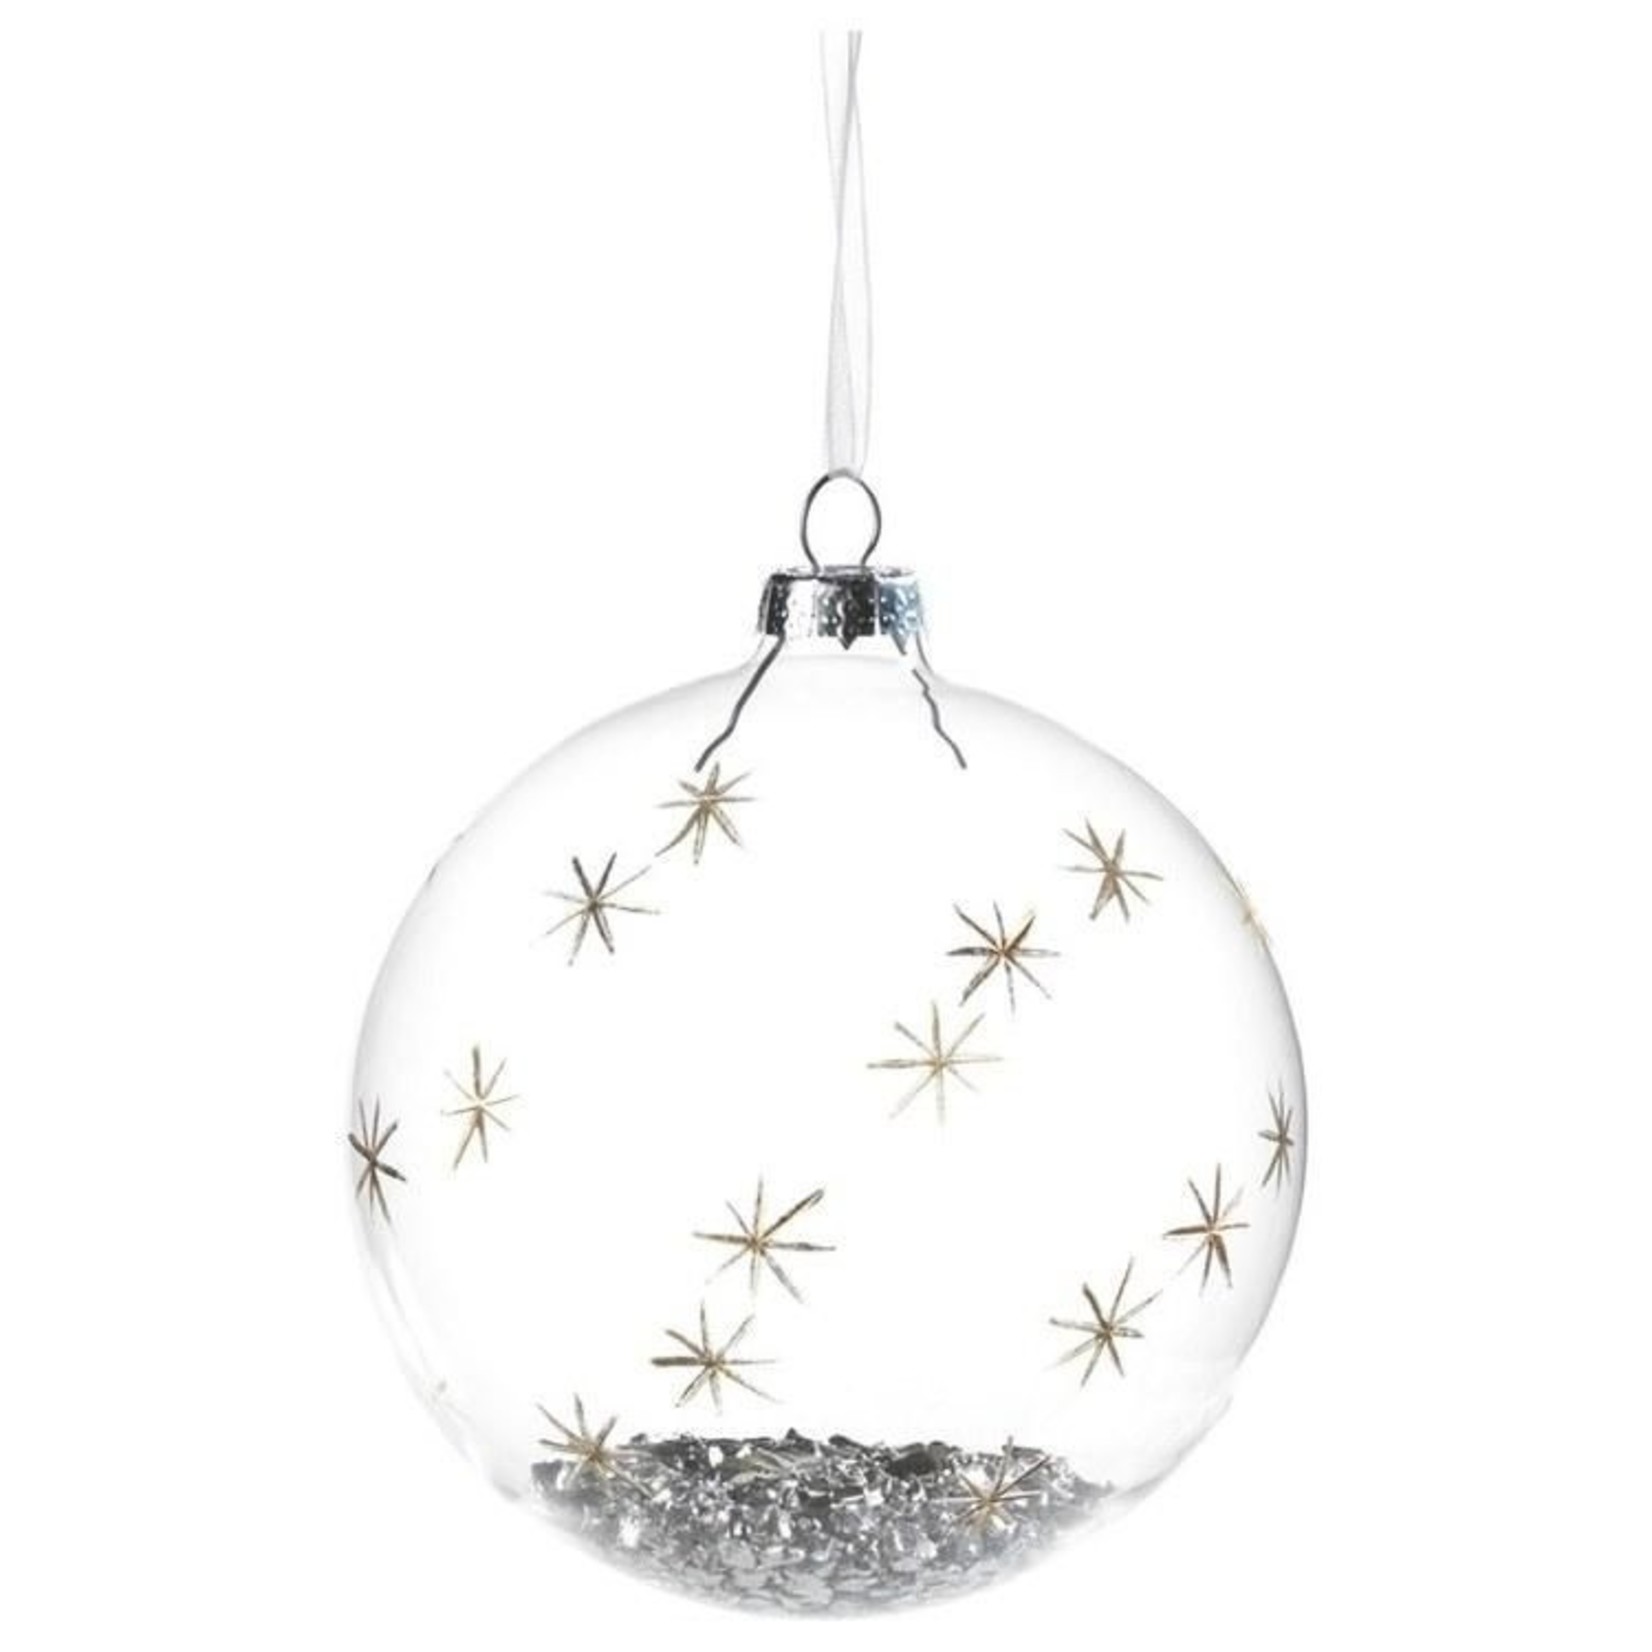 Zodax Clear Ball With Decoration Ornament - Small